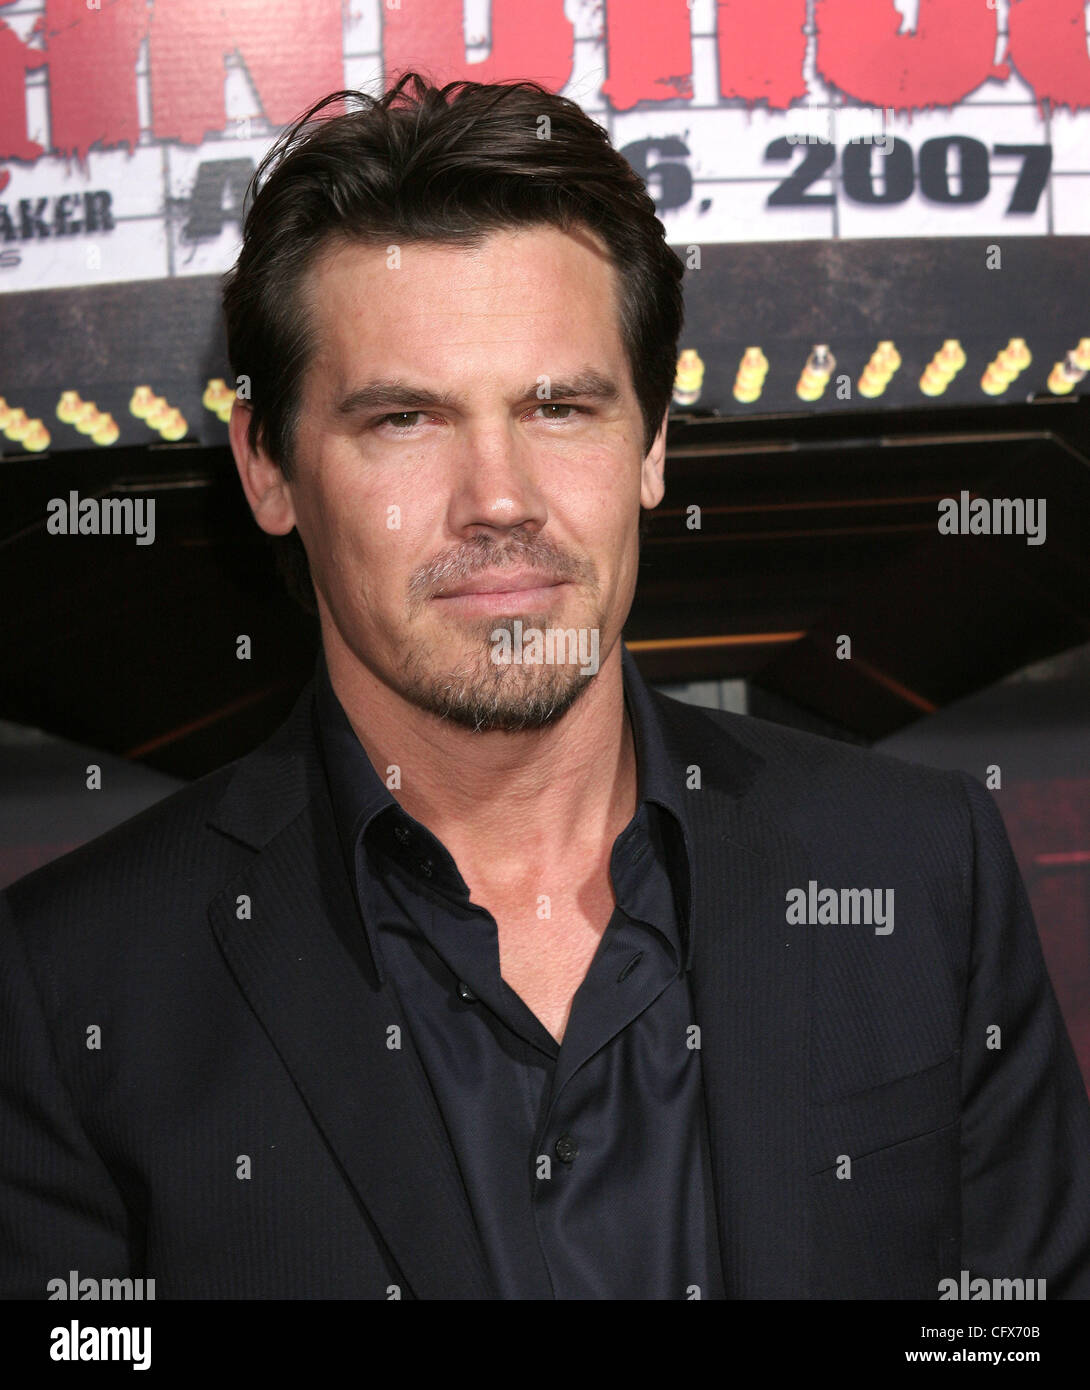 Mar 26, 2007; Los Angeles, California, USA; Actor JOSH BROLIN at the 'Grindhouse' Los Angeles Premiere held at The Orpheum Theater, downtown  Los Angeles Mandatory Credit: Photo by Paul Fenton/ZUMA Press. (©) Copyright 2007 by Paul Fenton Stock Photo